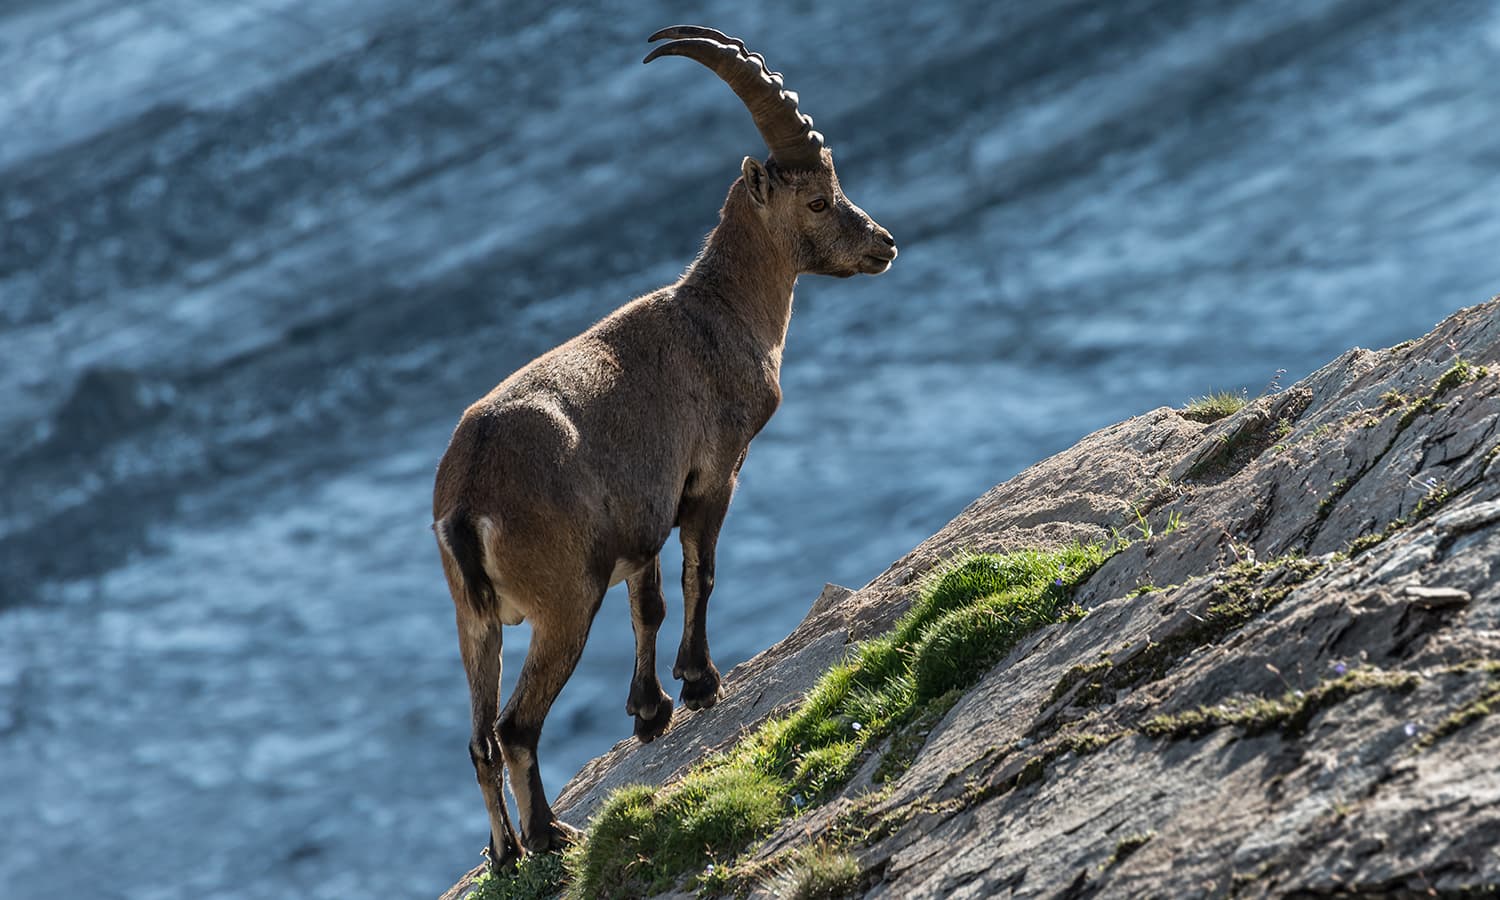 The Alpine ibex (Capra ibex), or Steinbock, is a species of wild goat that lives in the Alps. The males carry large, curved horns. This Steinbock lives next to the Pasterze glacier in the Austrian National Park "Hohe Tauern" in Carinthia. In the evening, when the tourists leave the region, the shy animals are sometimes seen closer to the hiking trails than usual.